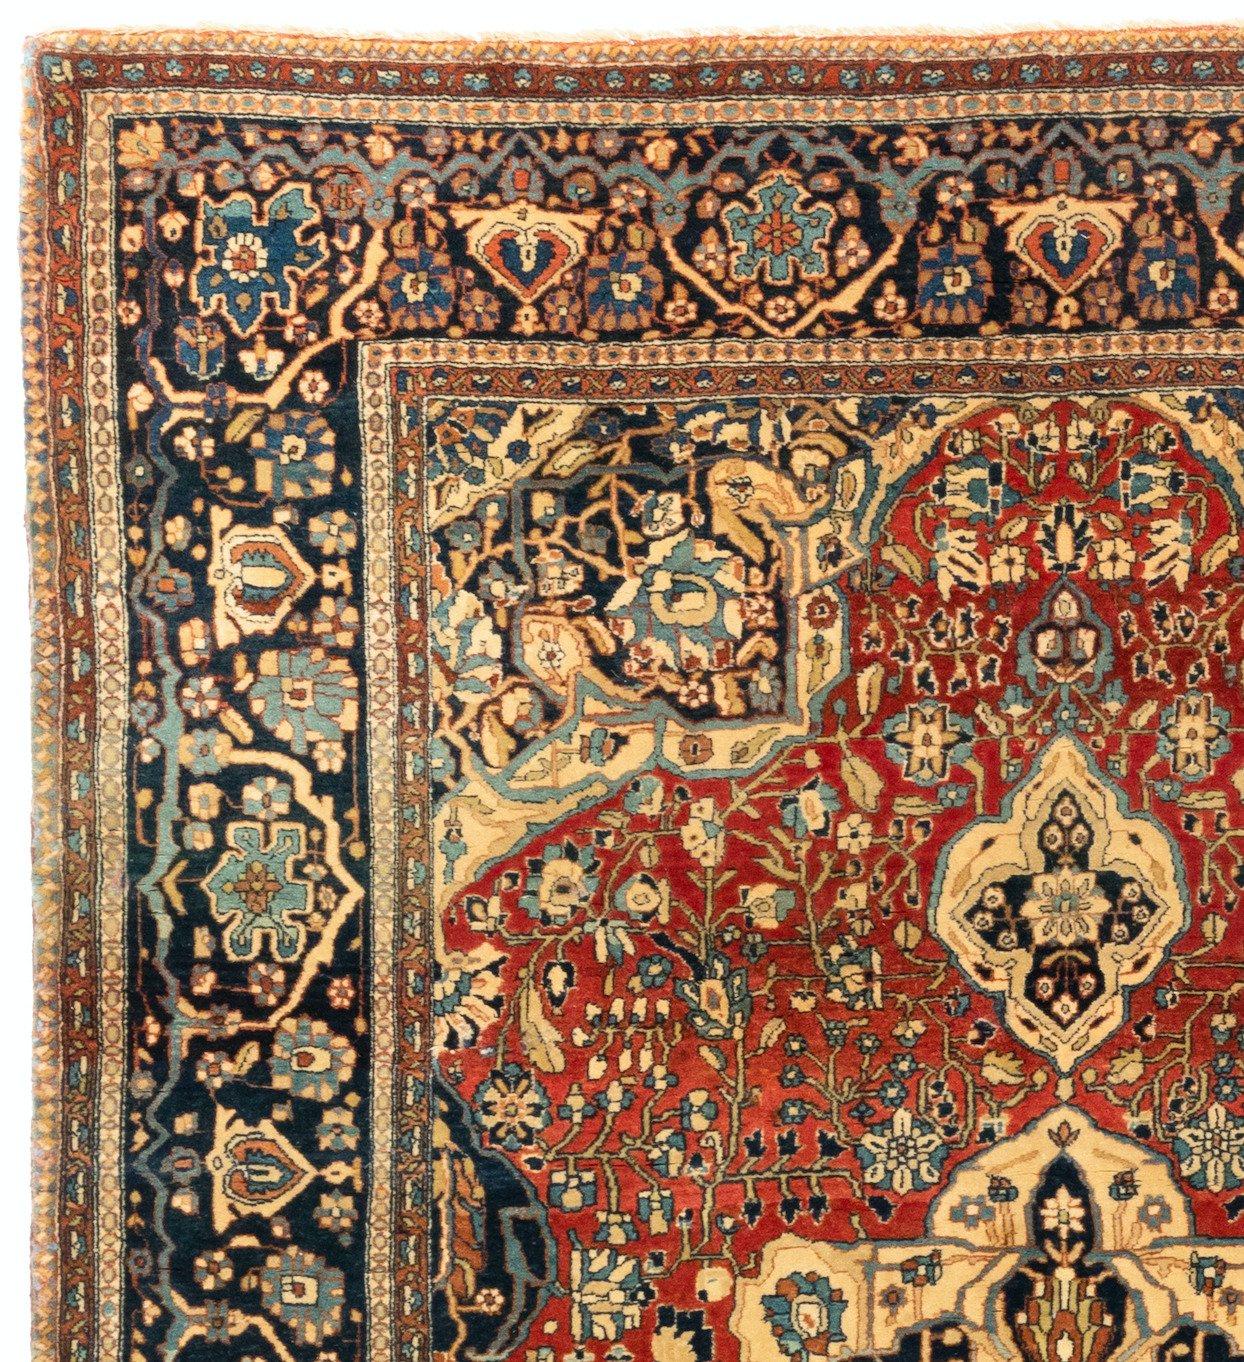 Hand-Woven Antique Persian Red Light Blue Navy Blue Floral Mohtasham Kashan Rug circa 1880s For Sale